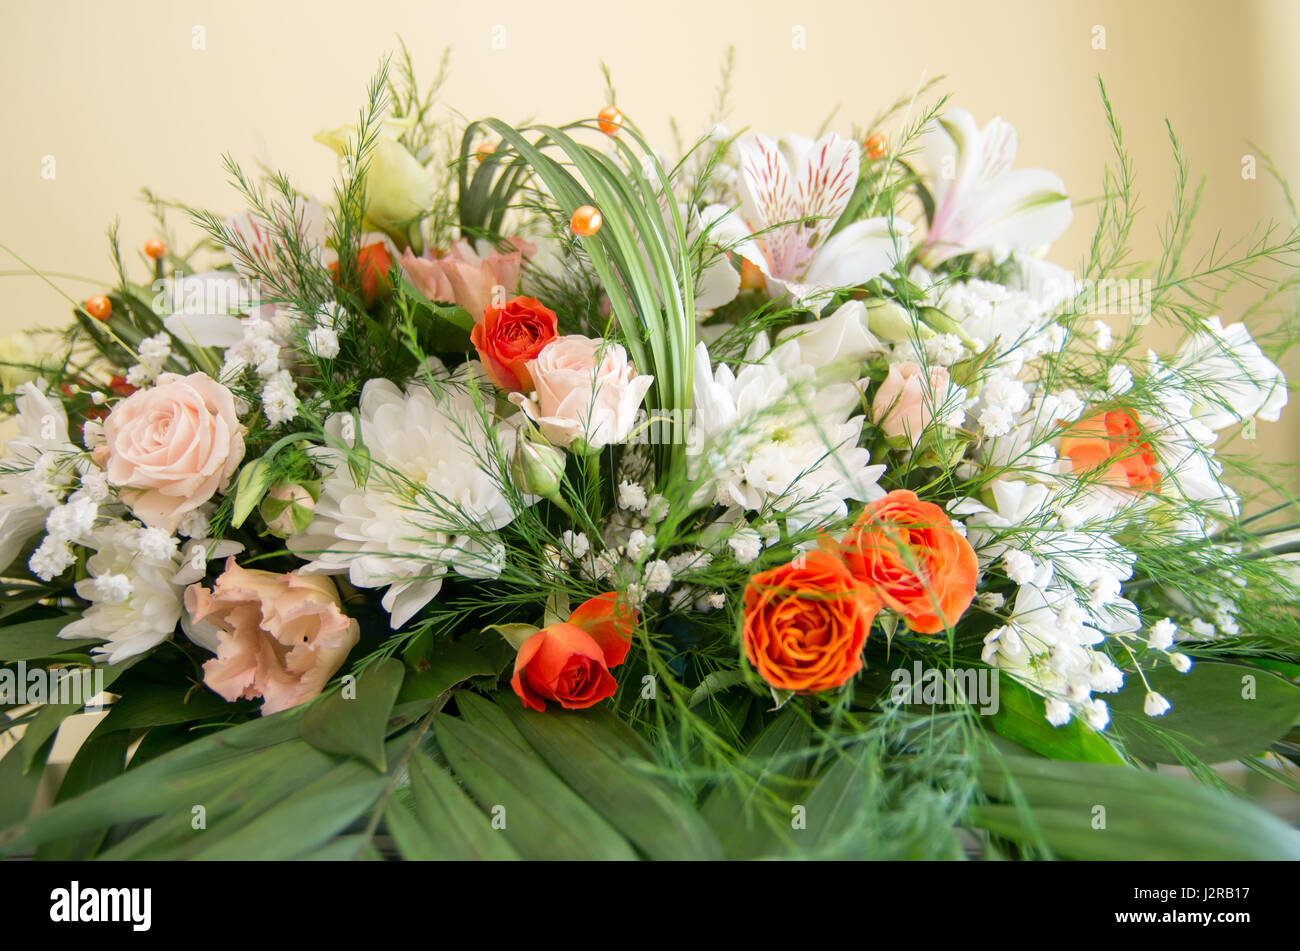 Fresh and fragrant flowers arranged with decorative leaves and grasses Stock Photo